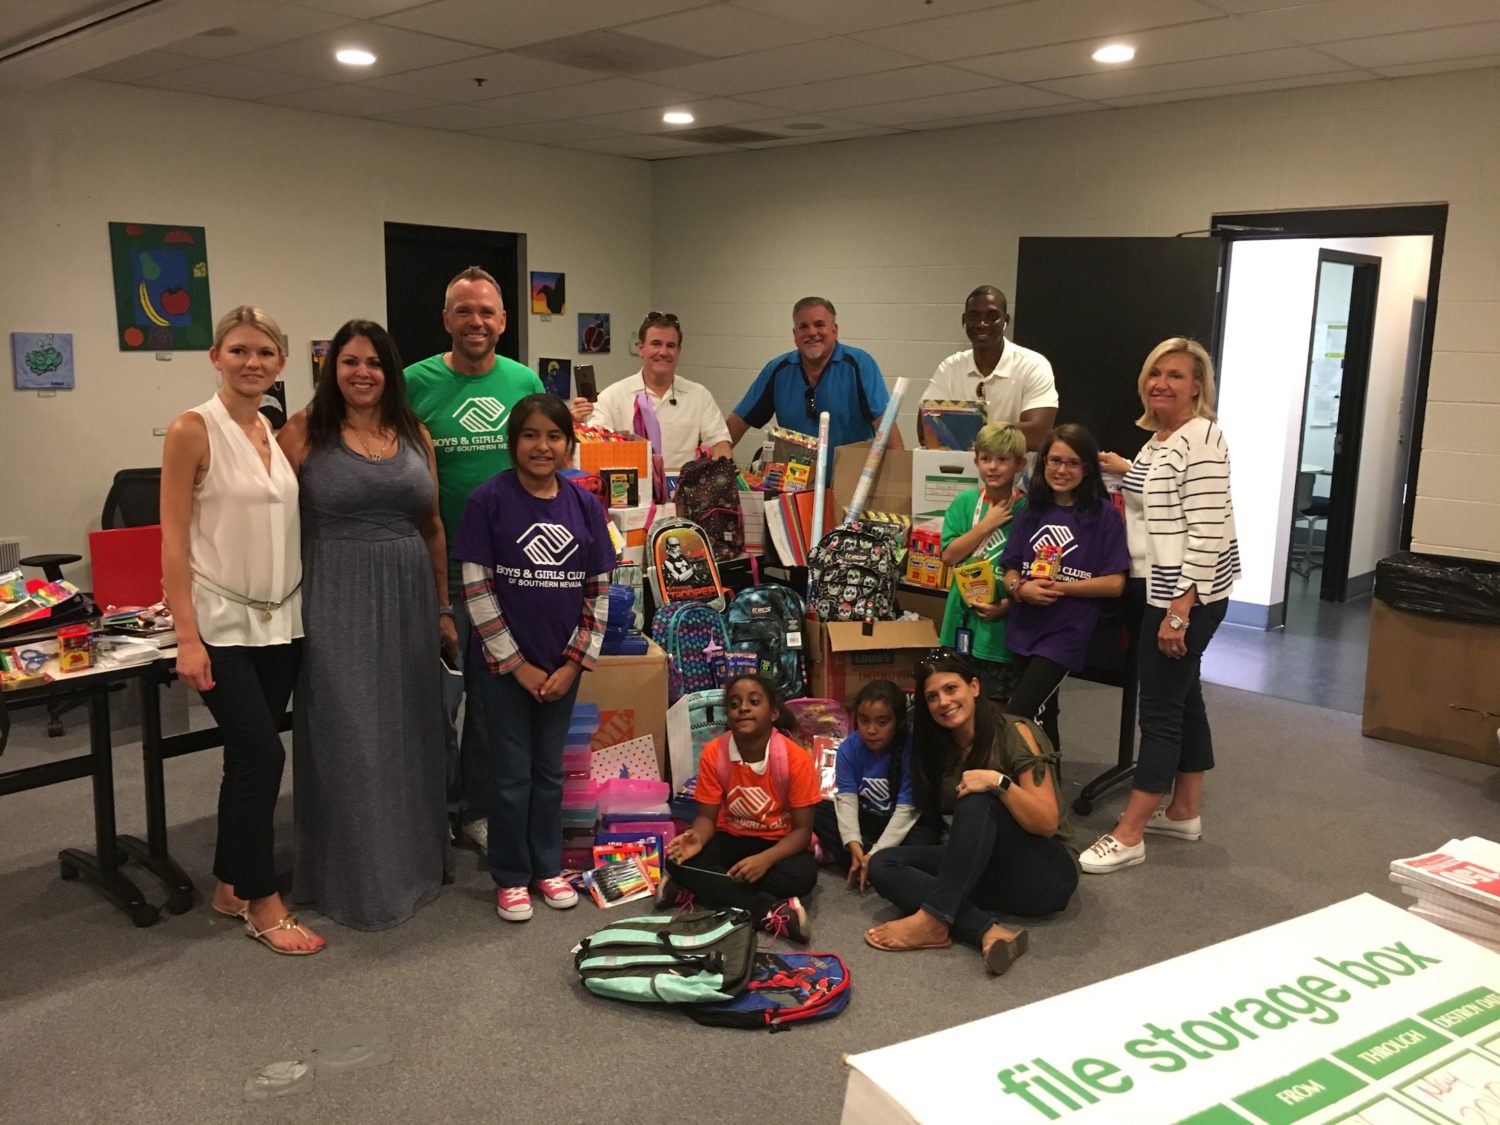 Local REALTORS® teamed up with Boys & Girls Clubs throughout the state to donate school supplies for students served by the clubs.